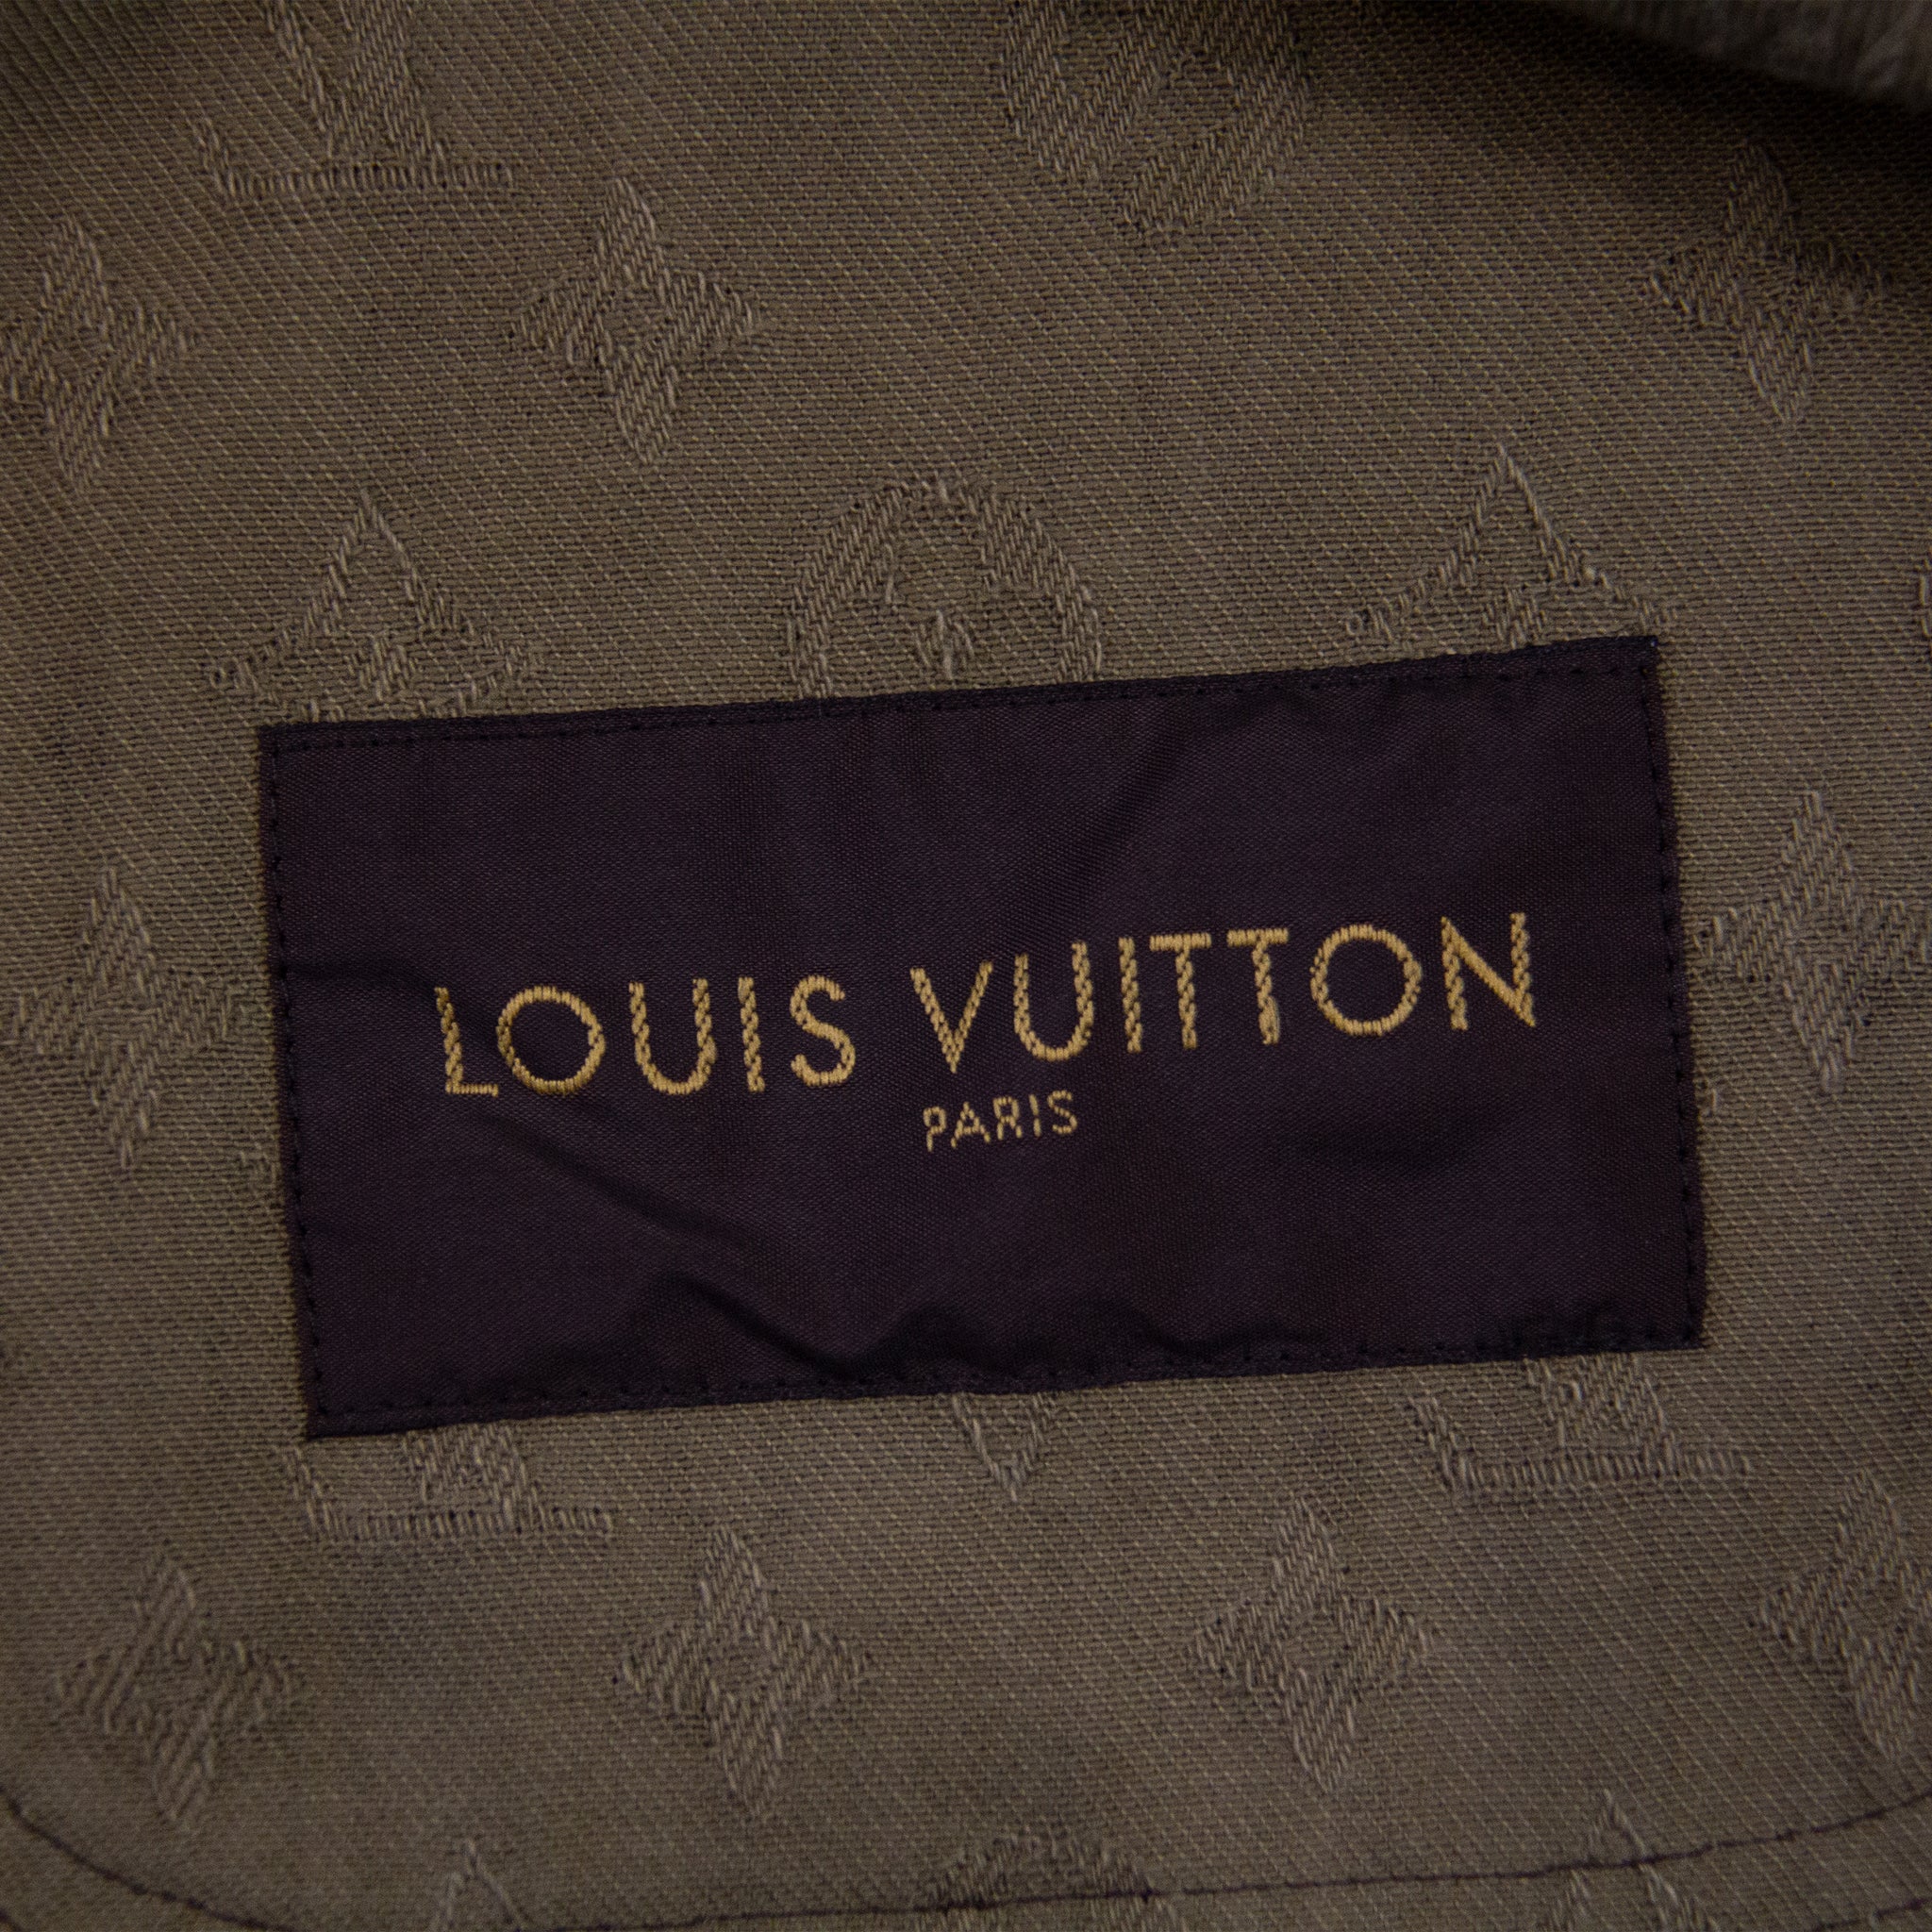 Real Louis Vuitton Scarf Label